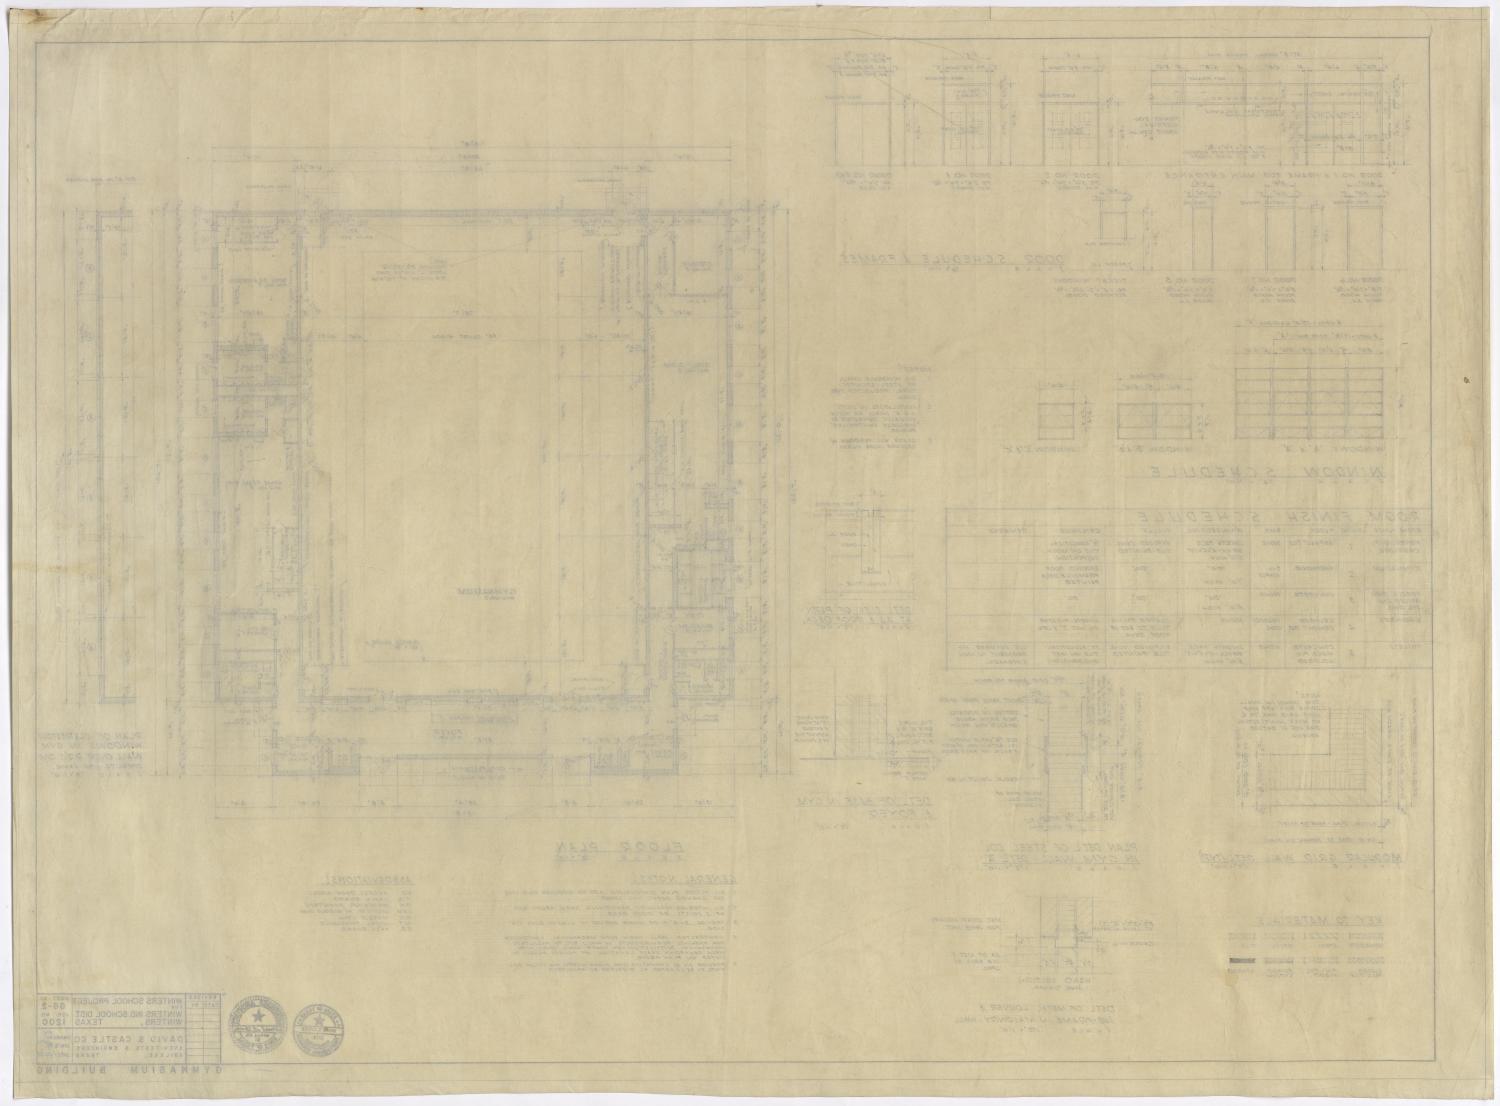 Winters School Project, Winters, Texas: Floor Plan with Schedules
                                                
                                                    [Sequence #]: 2 of 2
                                                